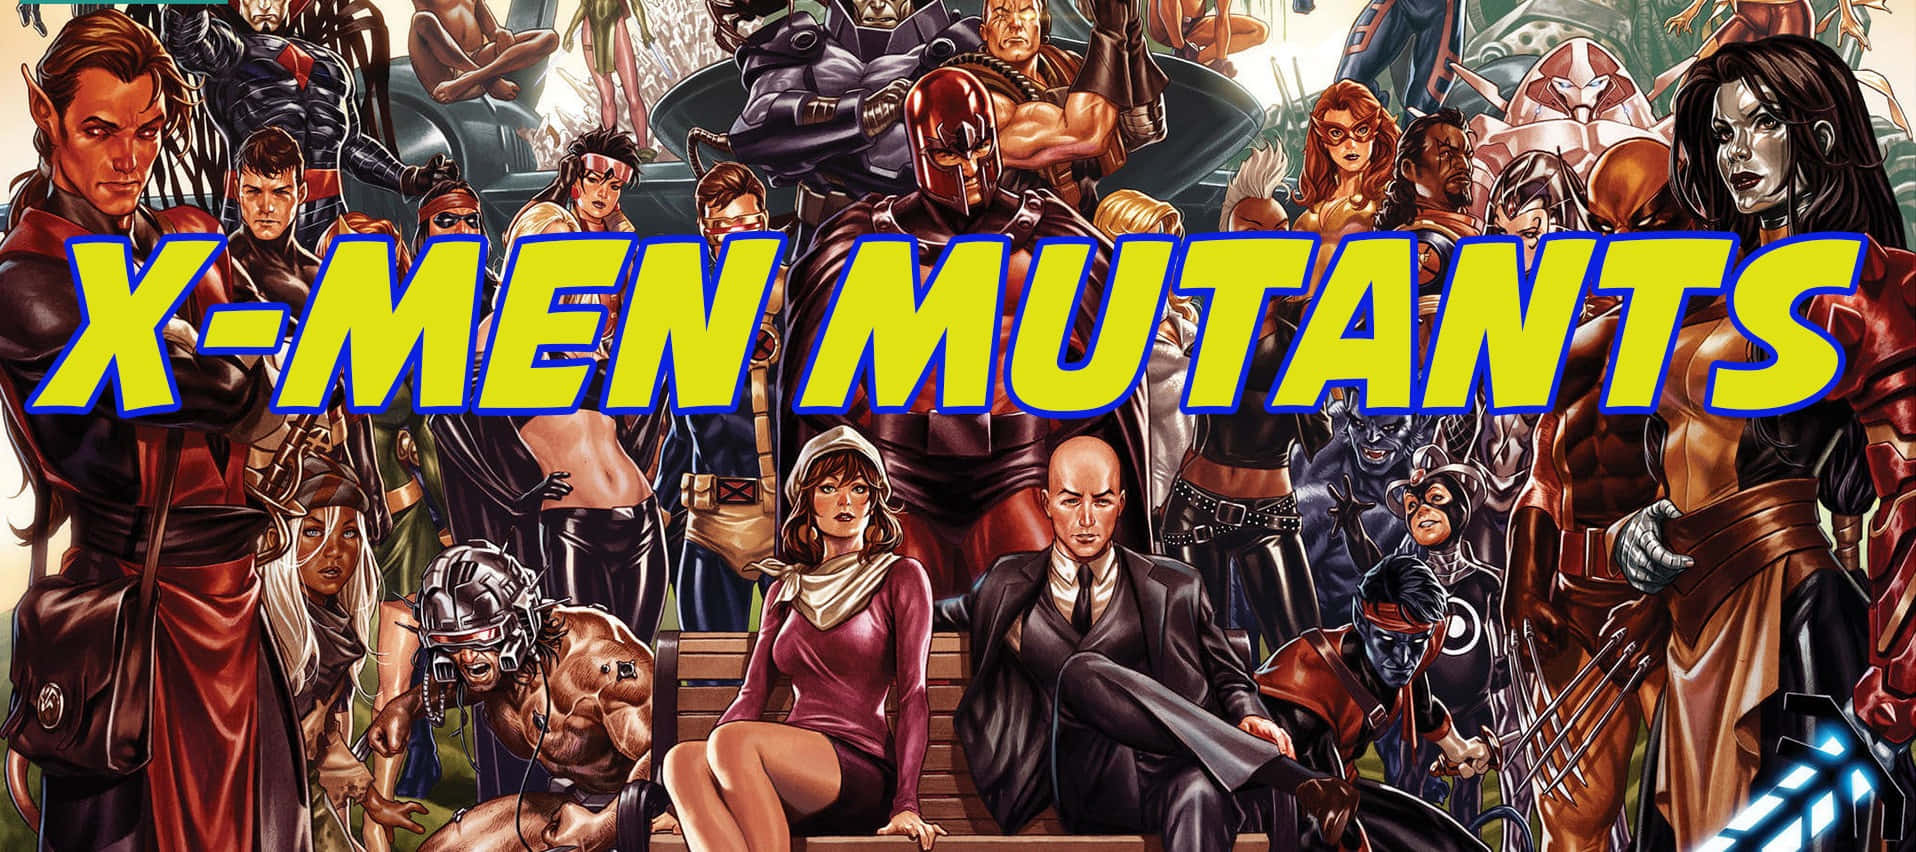 A team of powerful mutants ready for action Wallpaper